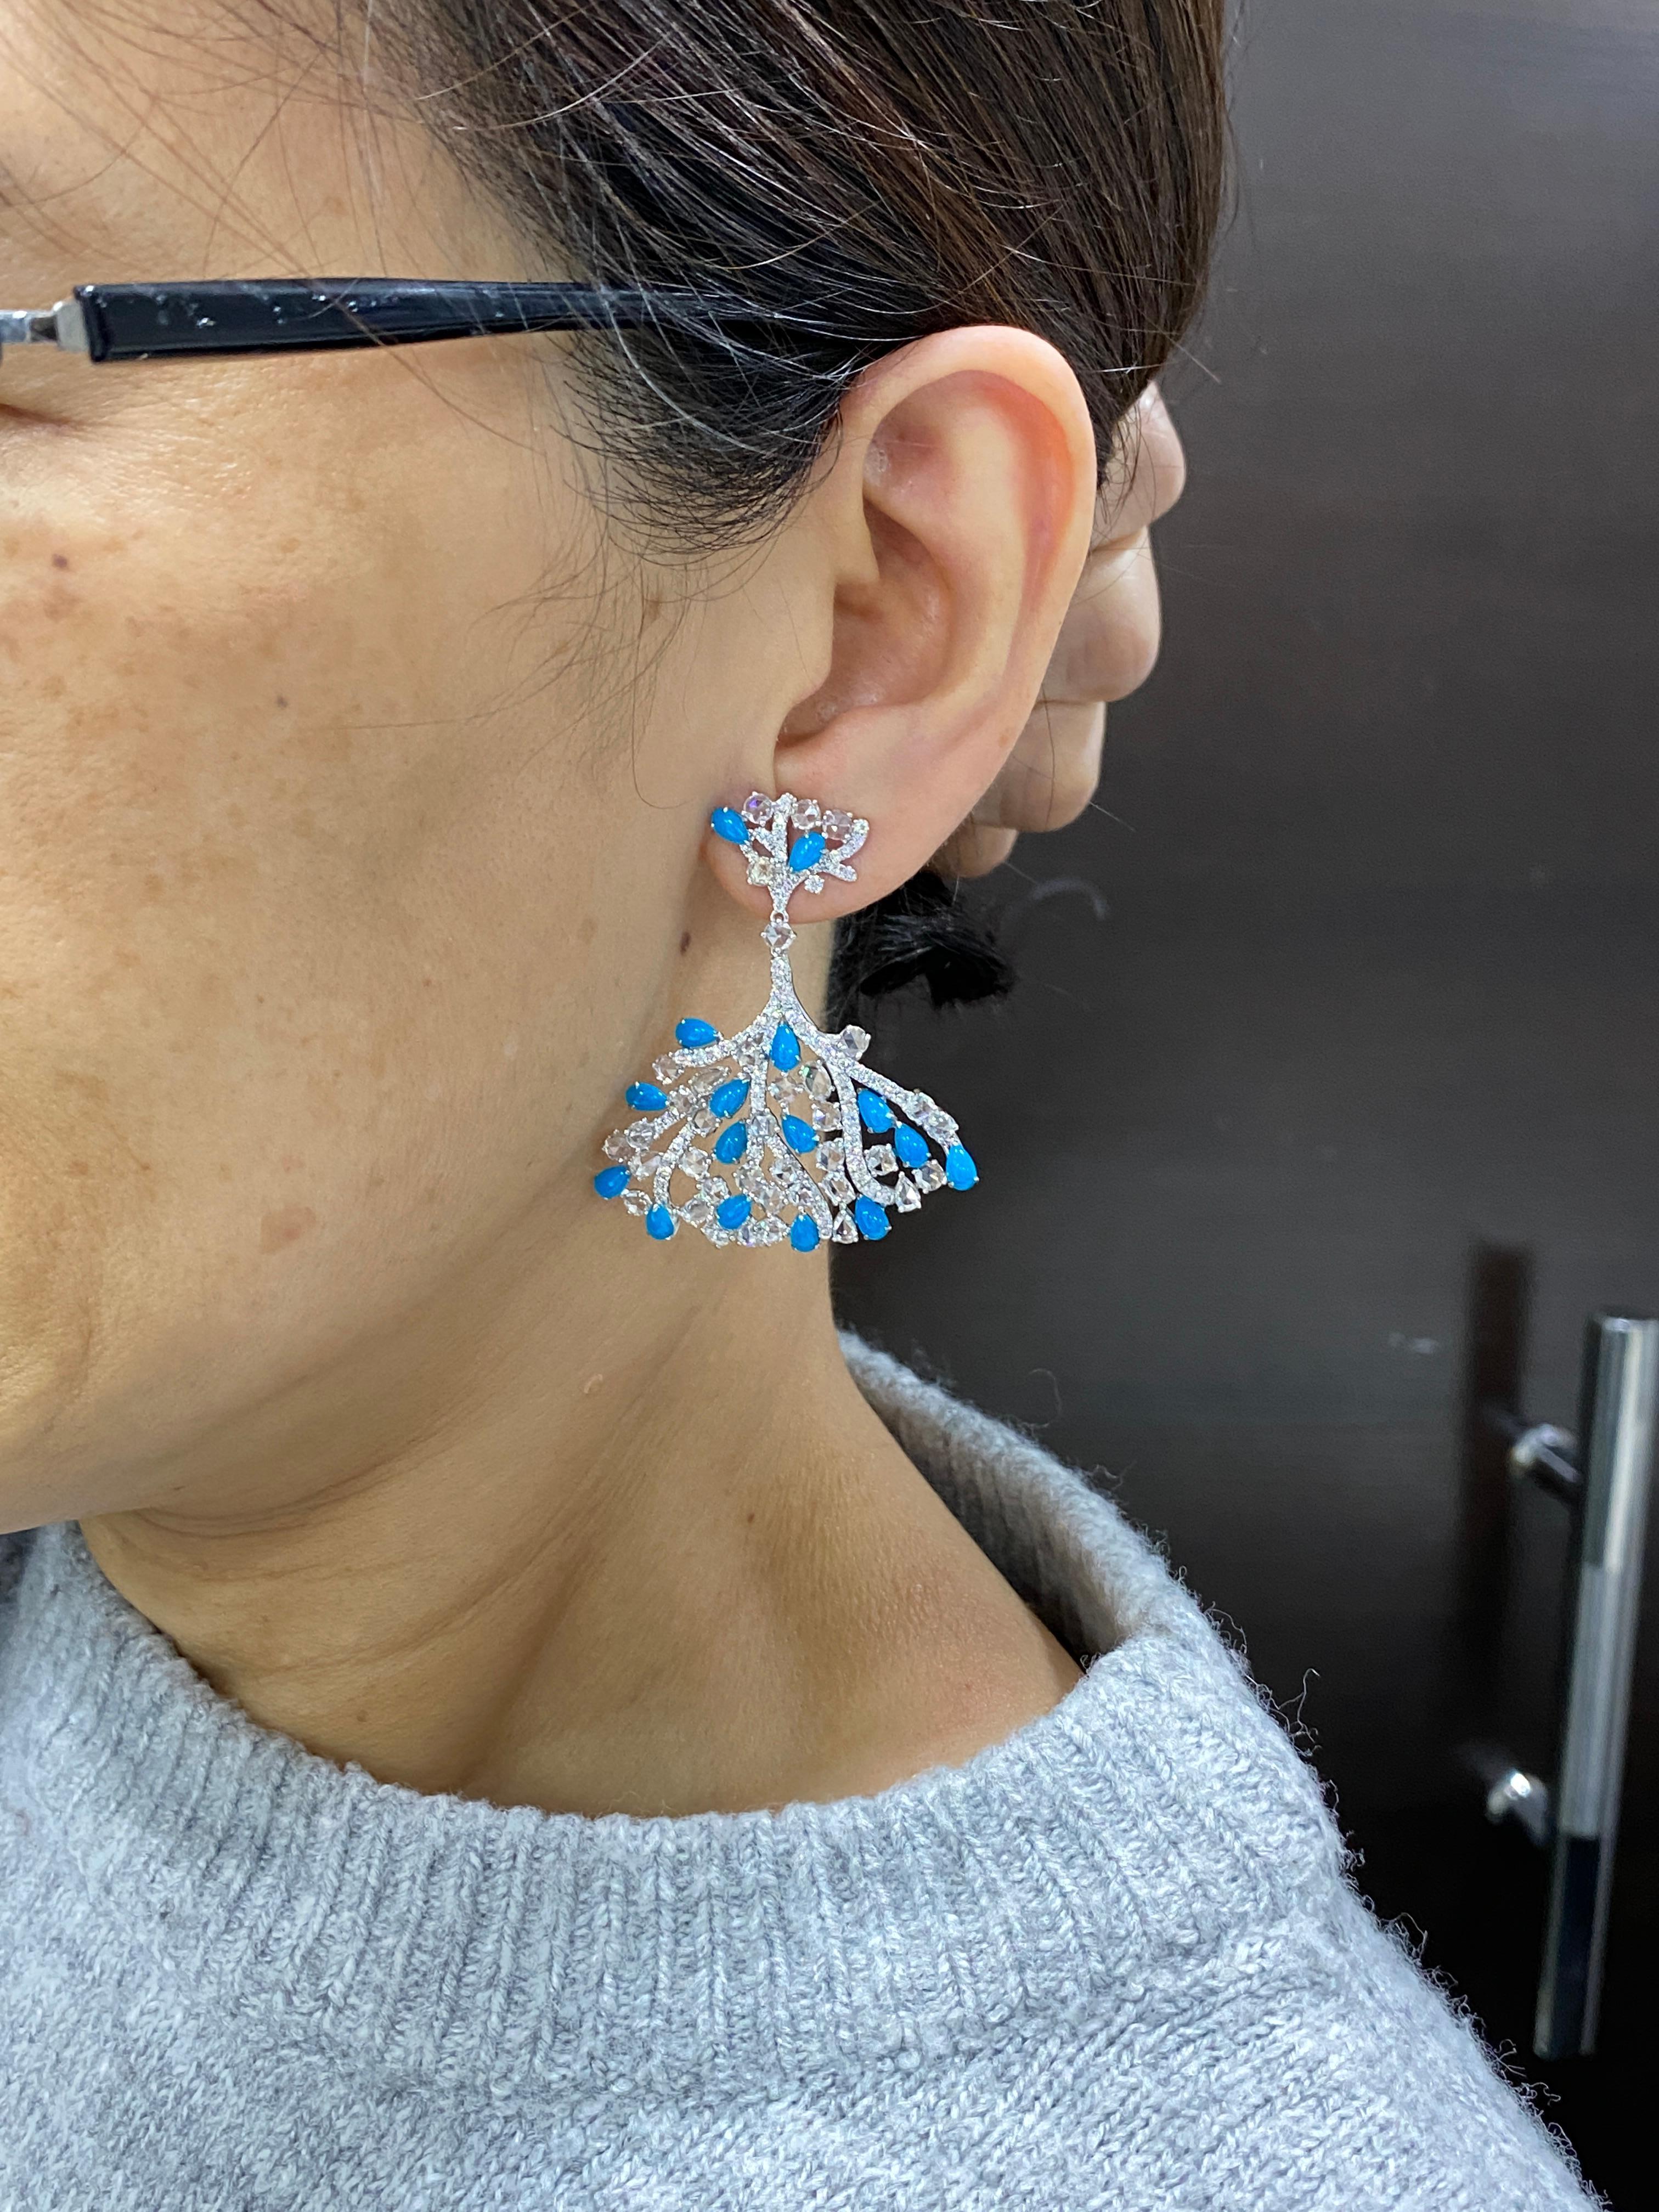 JR Turquoise and Rose Cut 18 Karat White Gold Earring

Full of brilliance and sparkle, this Rose cut diamond earring with Turquoise will make a perfect piece for your ensemble.

Diamond Weight : 7.28 carats

Addition details or Video upon request.